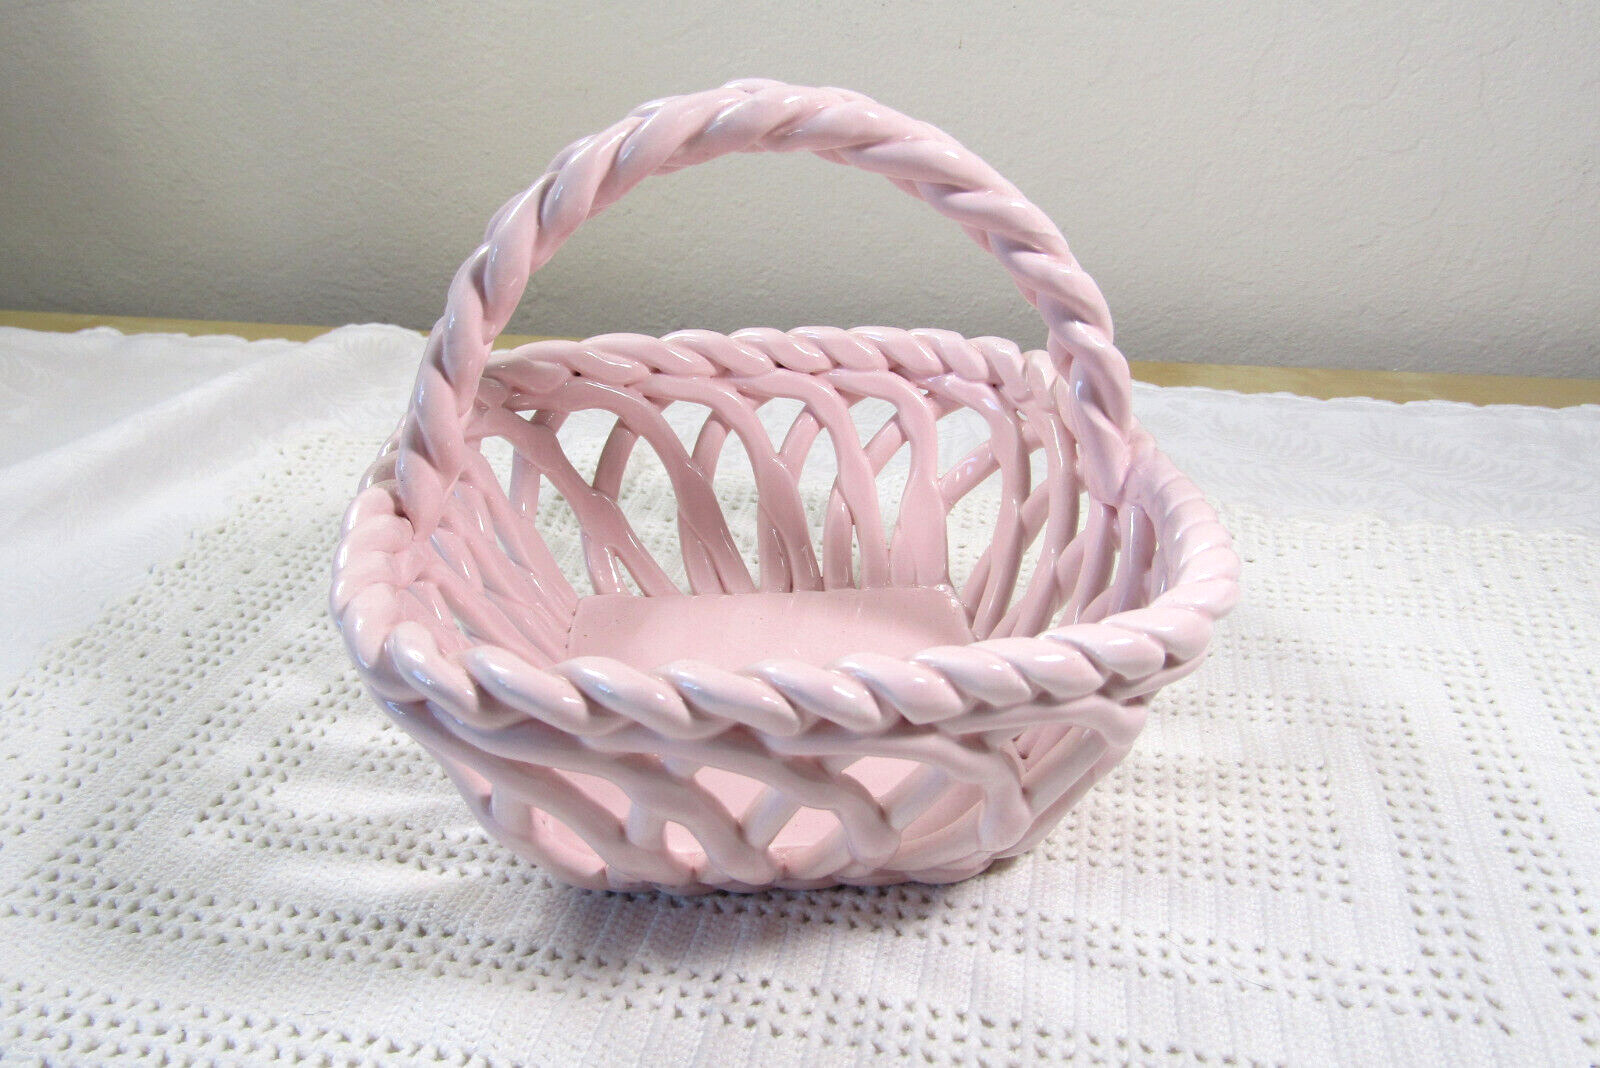 GRACE’S PANTRY PINK HAND WOVEN CERAMIC BASKET 6”